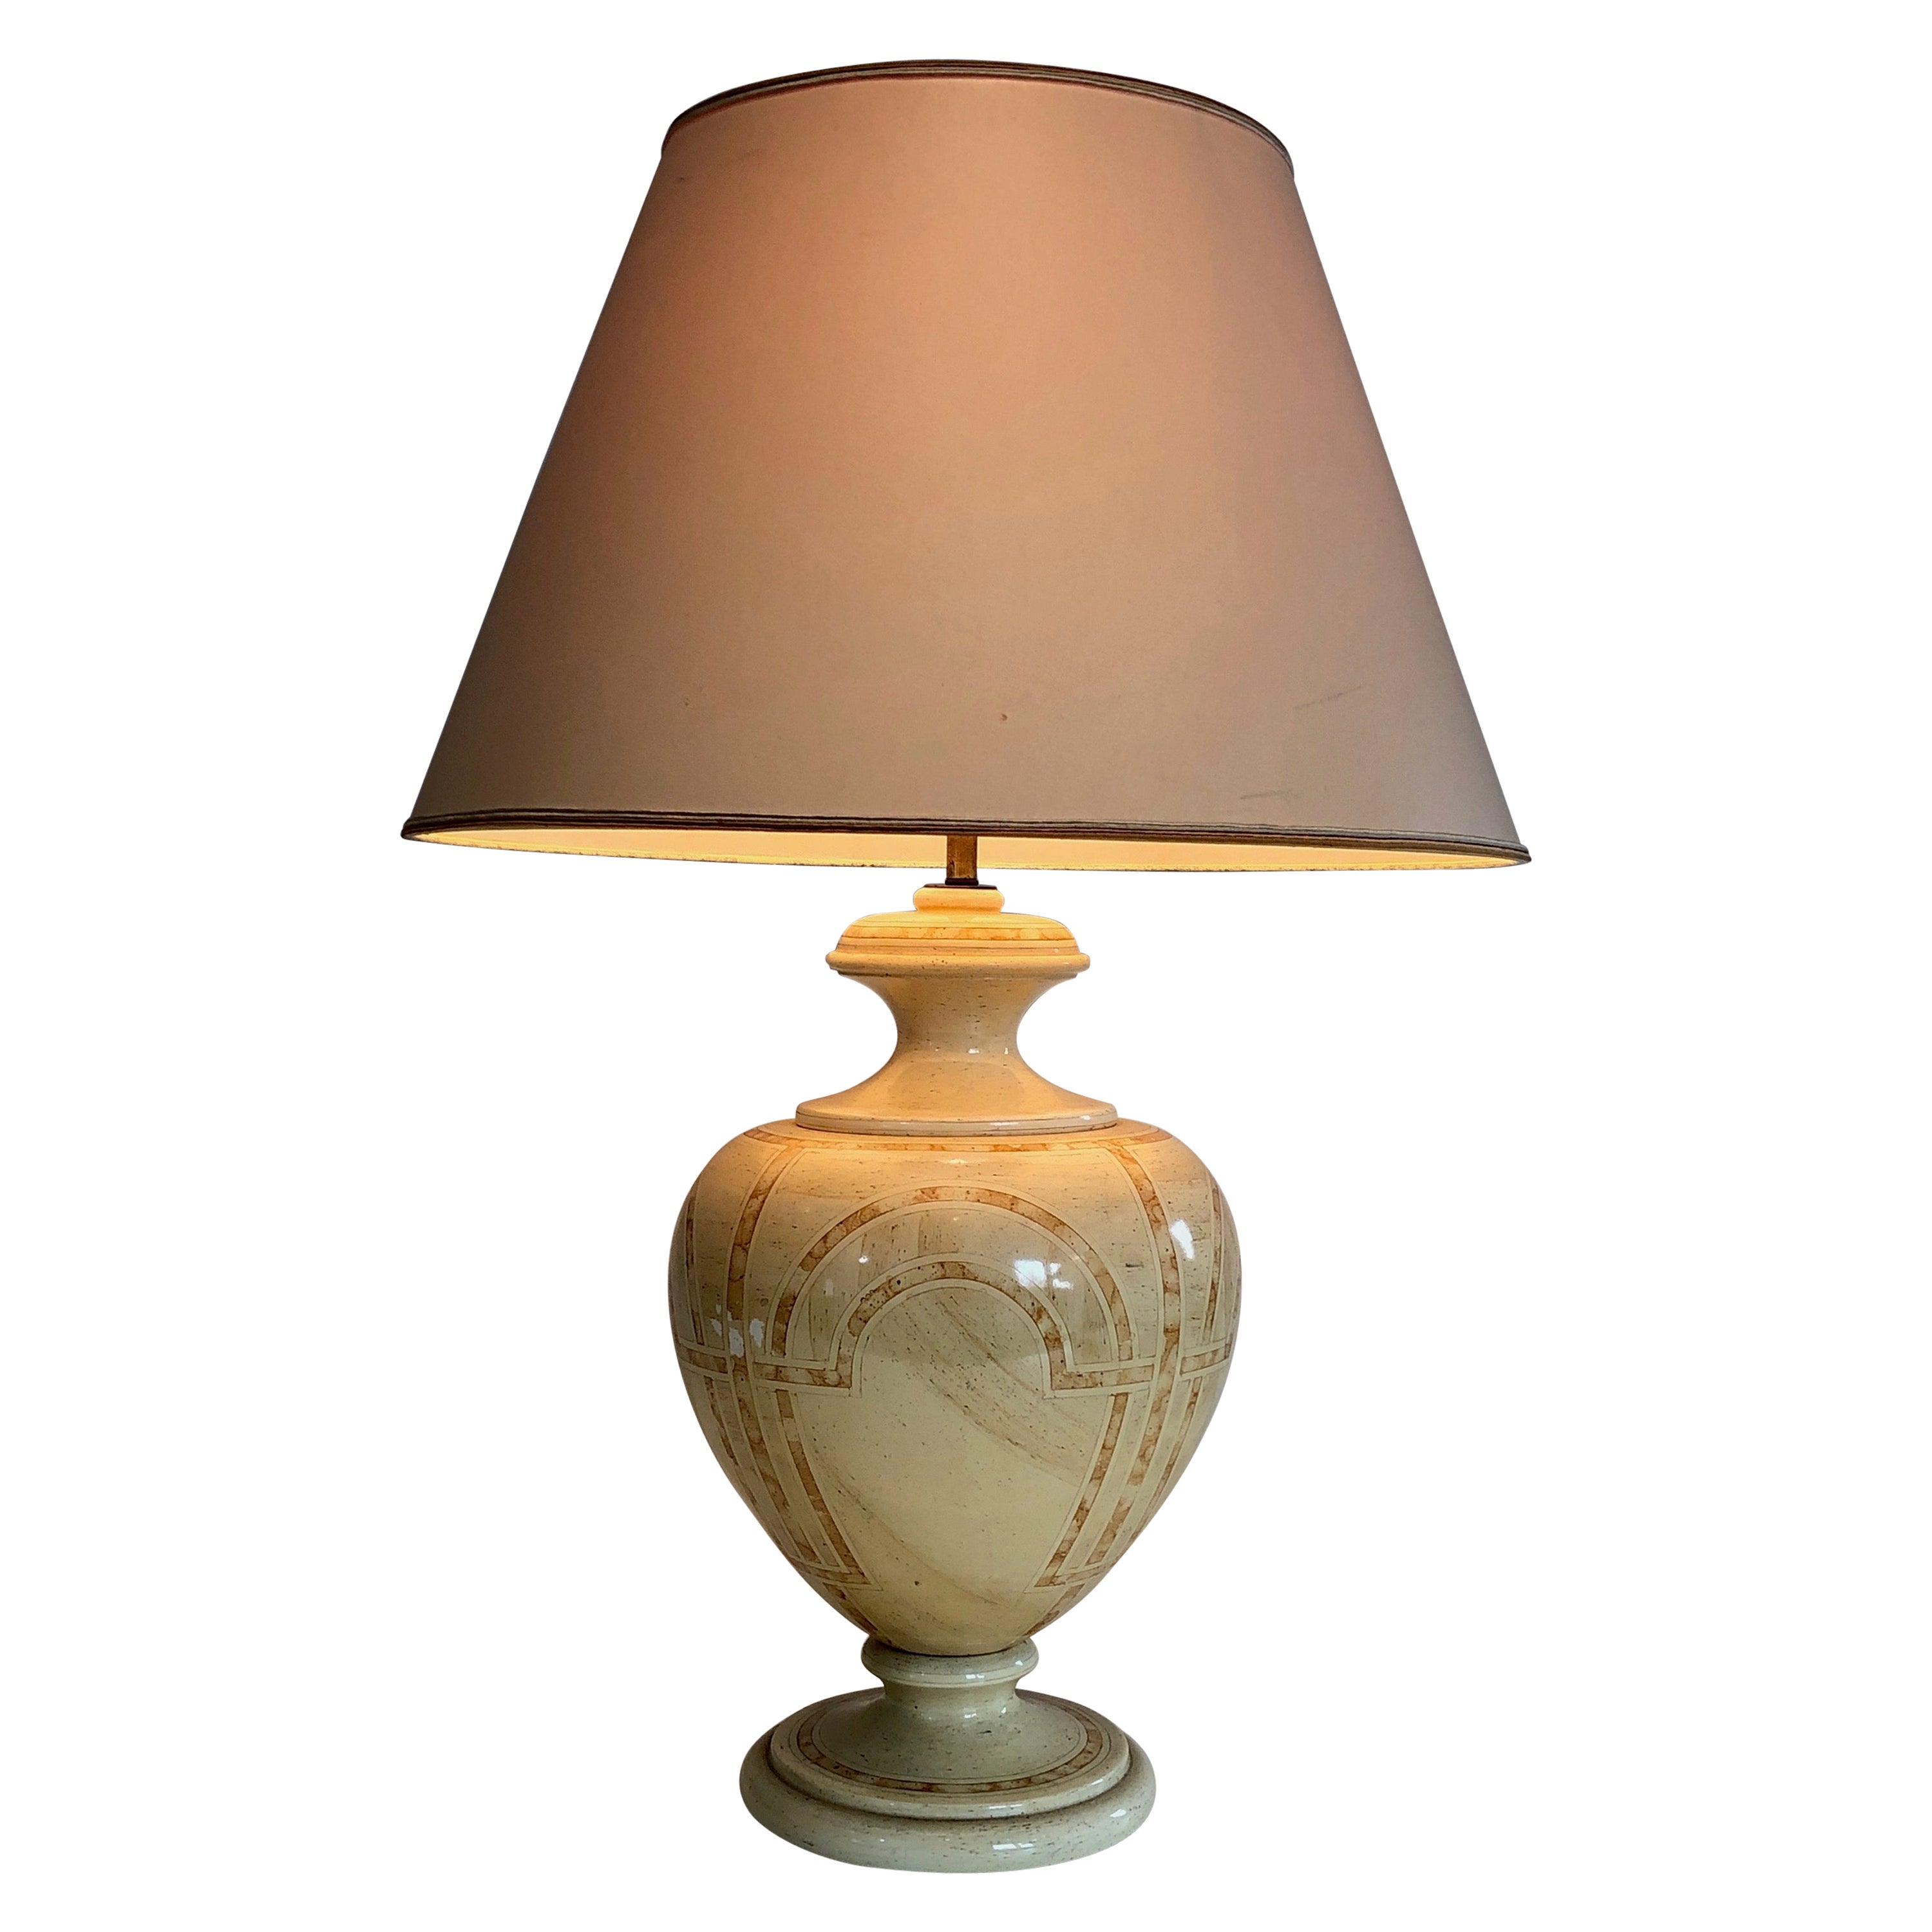 Eggshell Lacquered Table Lamp with Interlacing Decors, French Work, circa 1970 For Sale